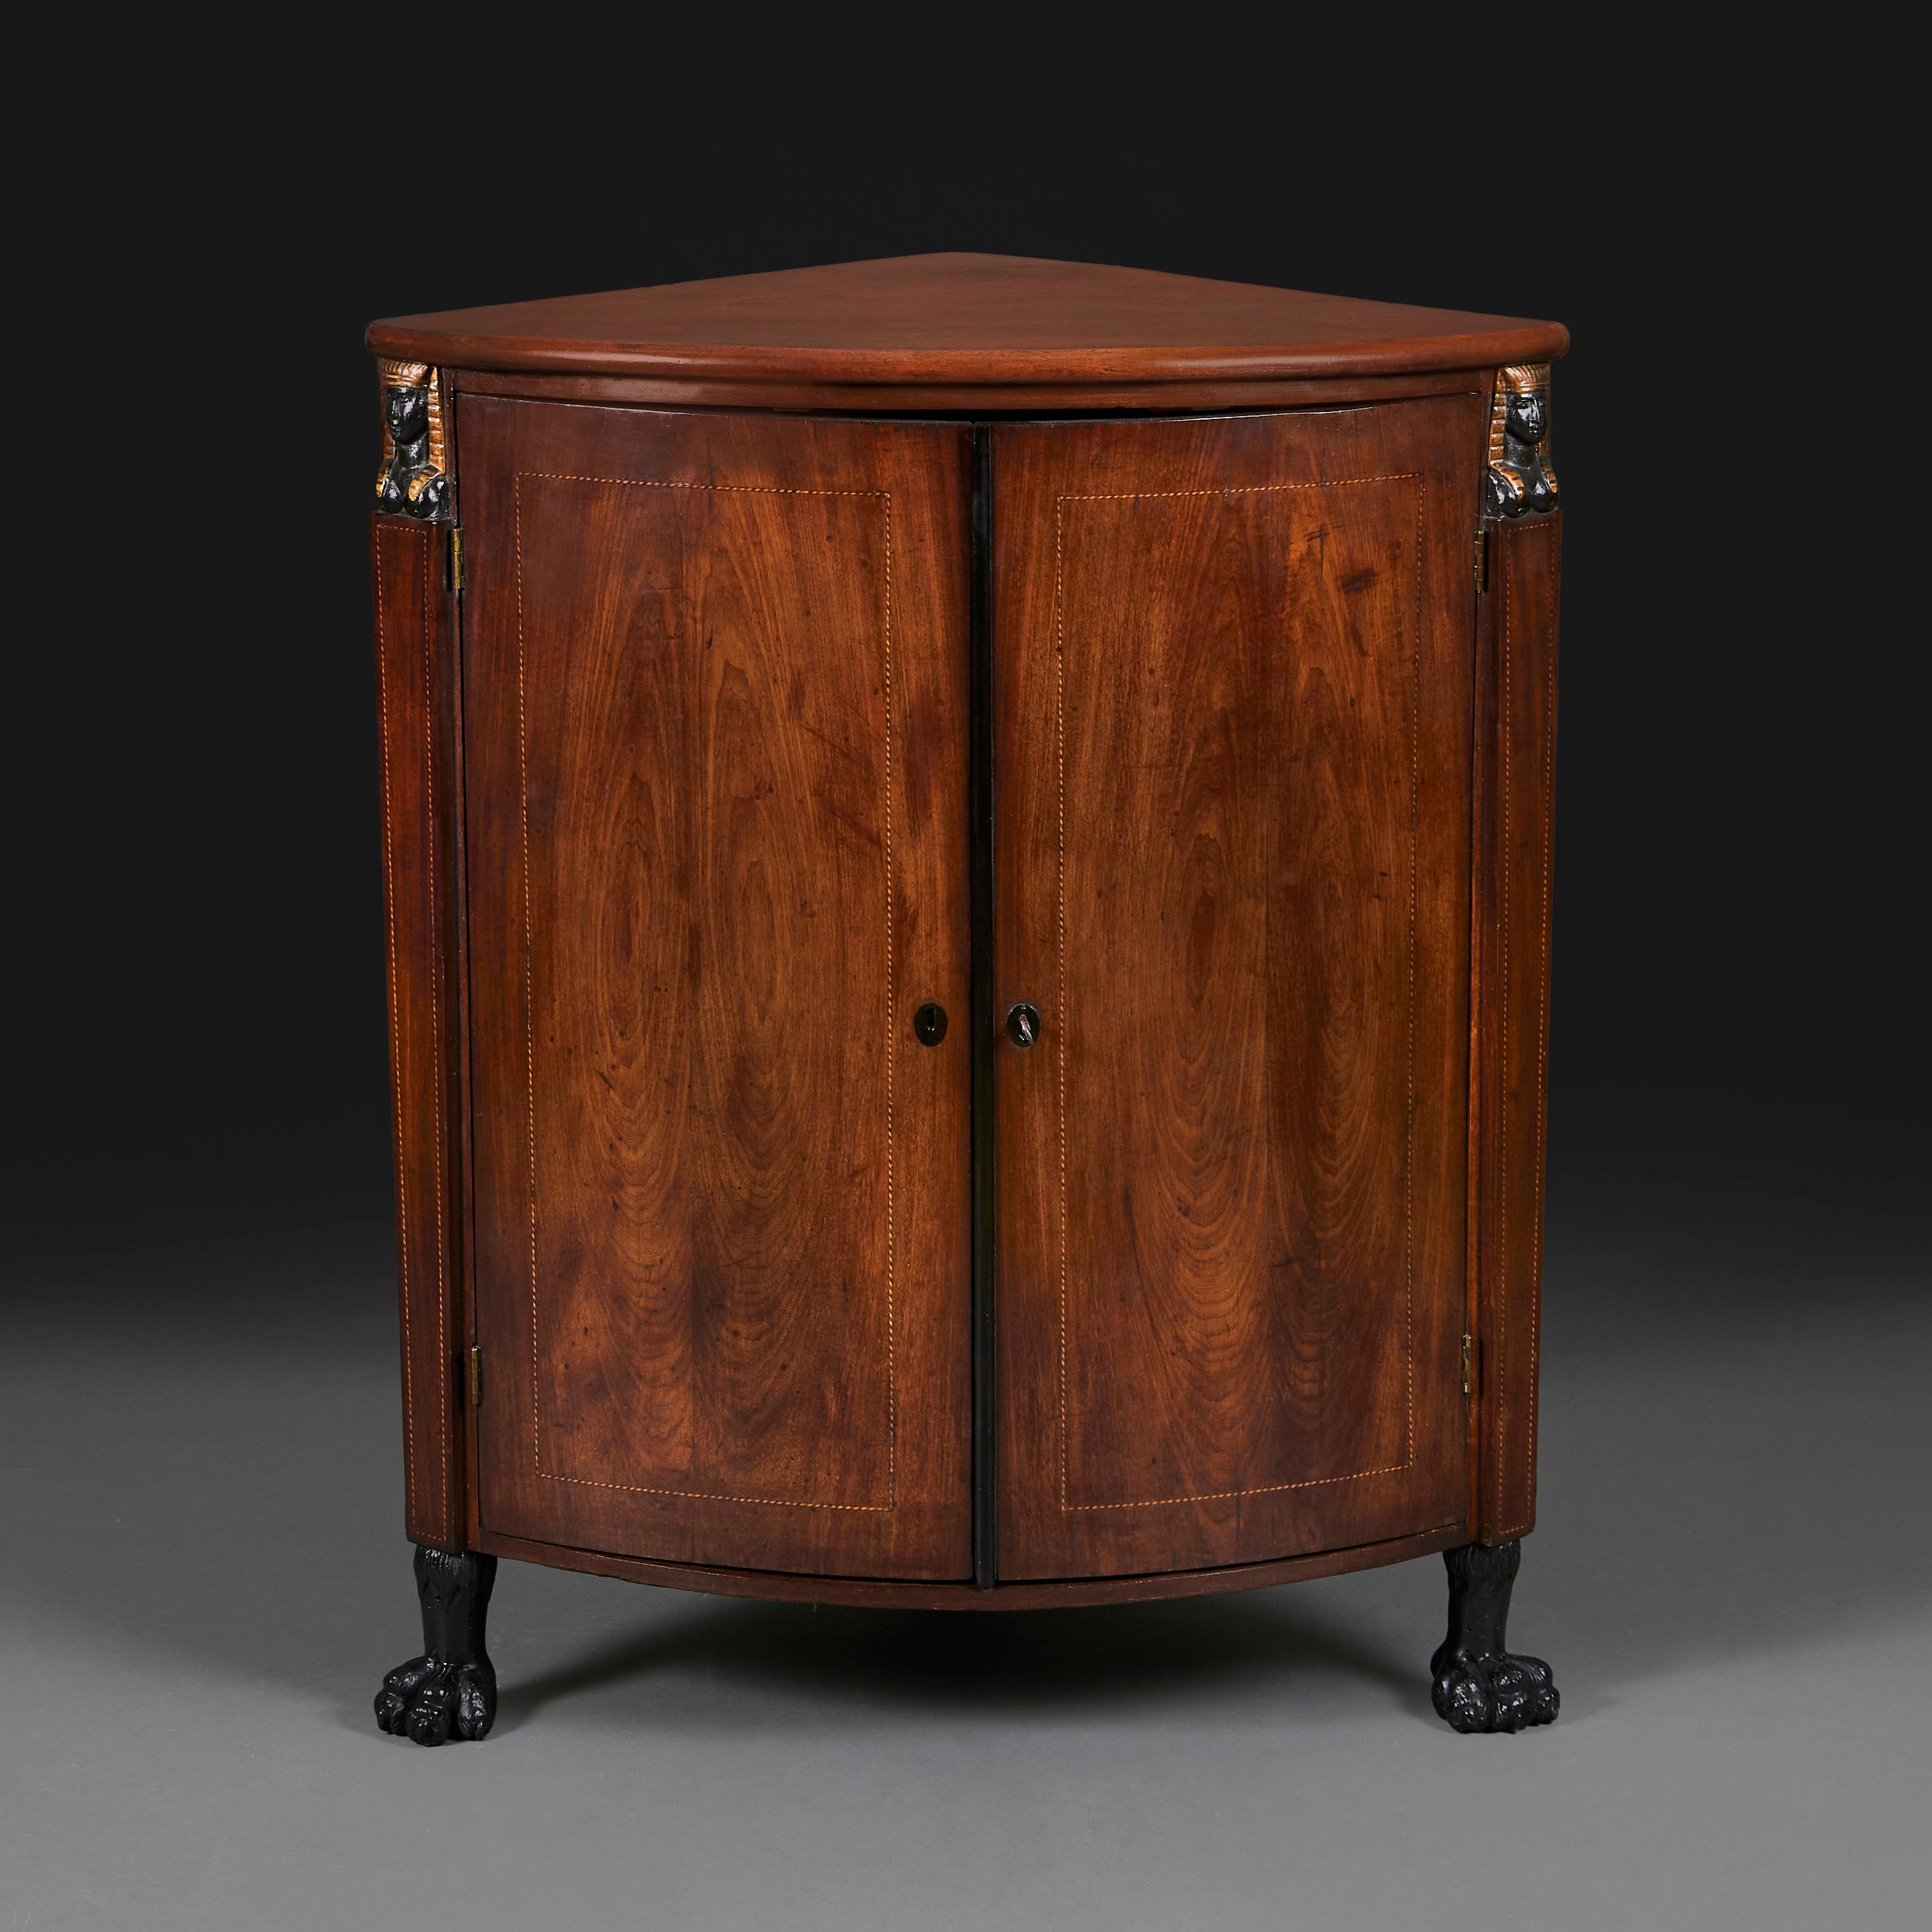 France, circa 1860

A mid nineteenth century mahogany corner cupboard, opening with two doors to the front, with inlaid marquetry beaded borders to the doors and the uprights, the uprights surmounted by Egyptian caryatids, and terminating in hairy